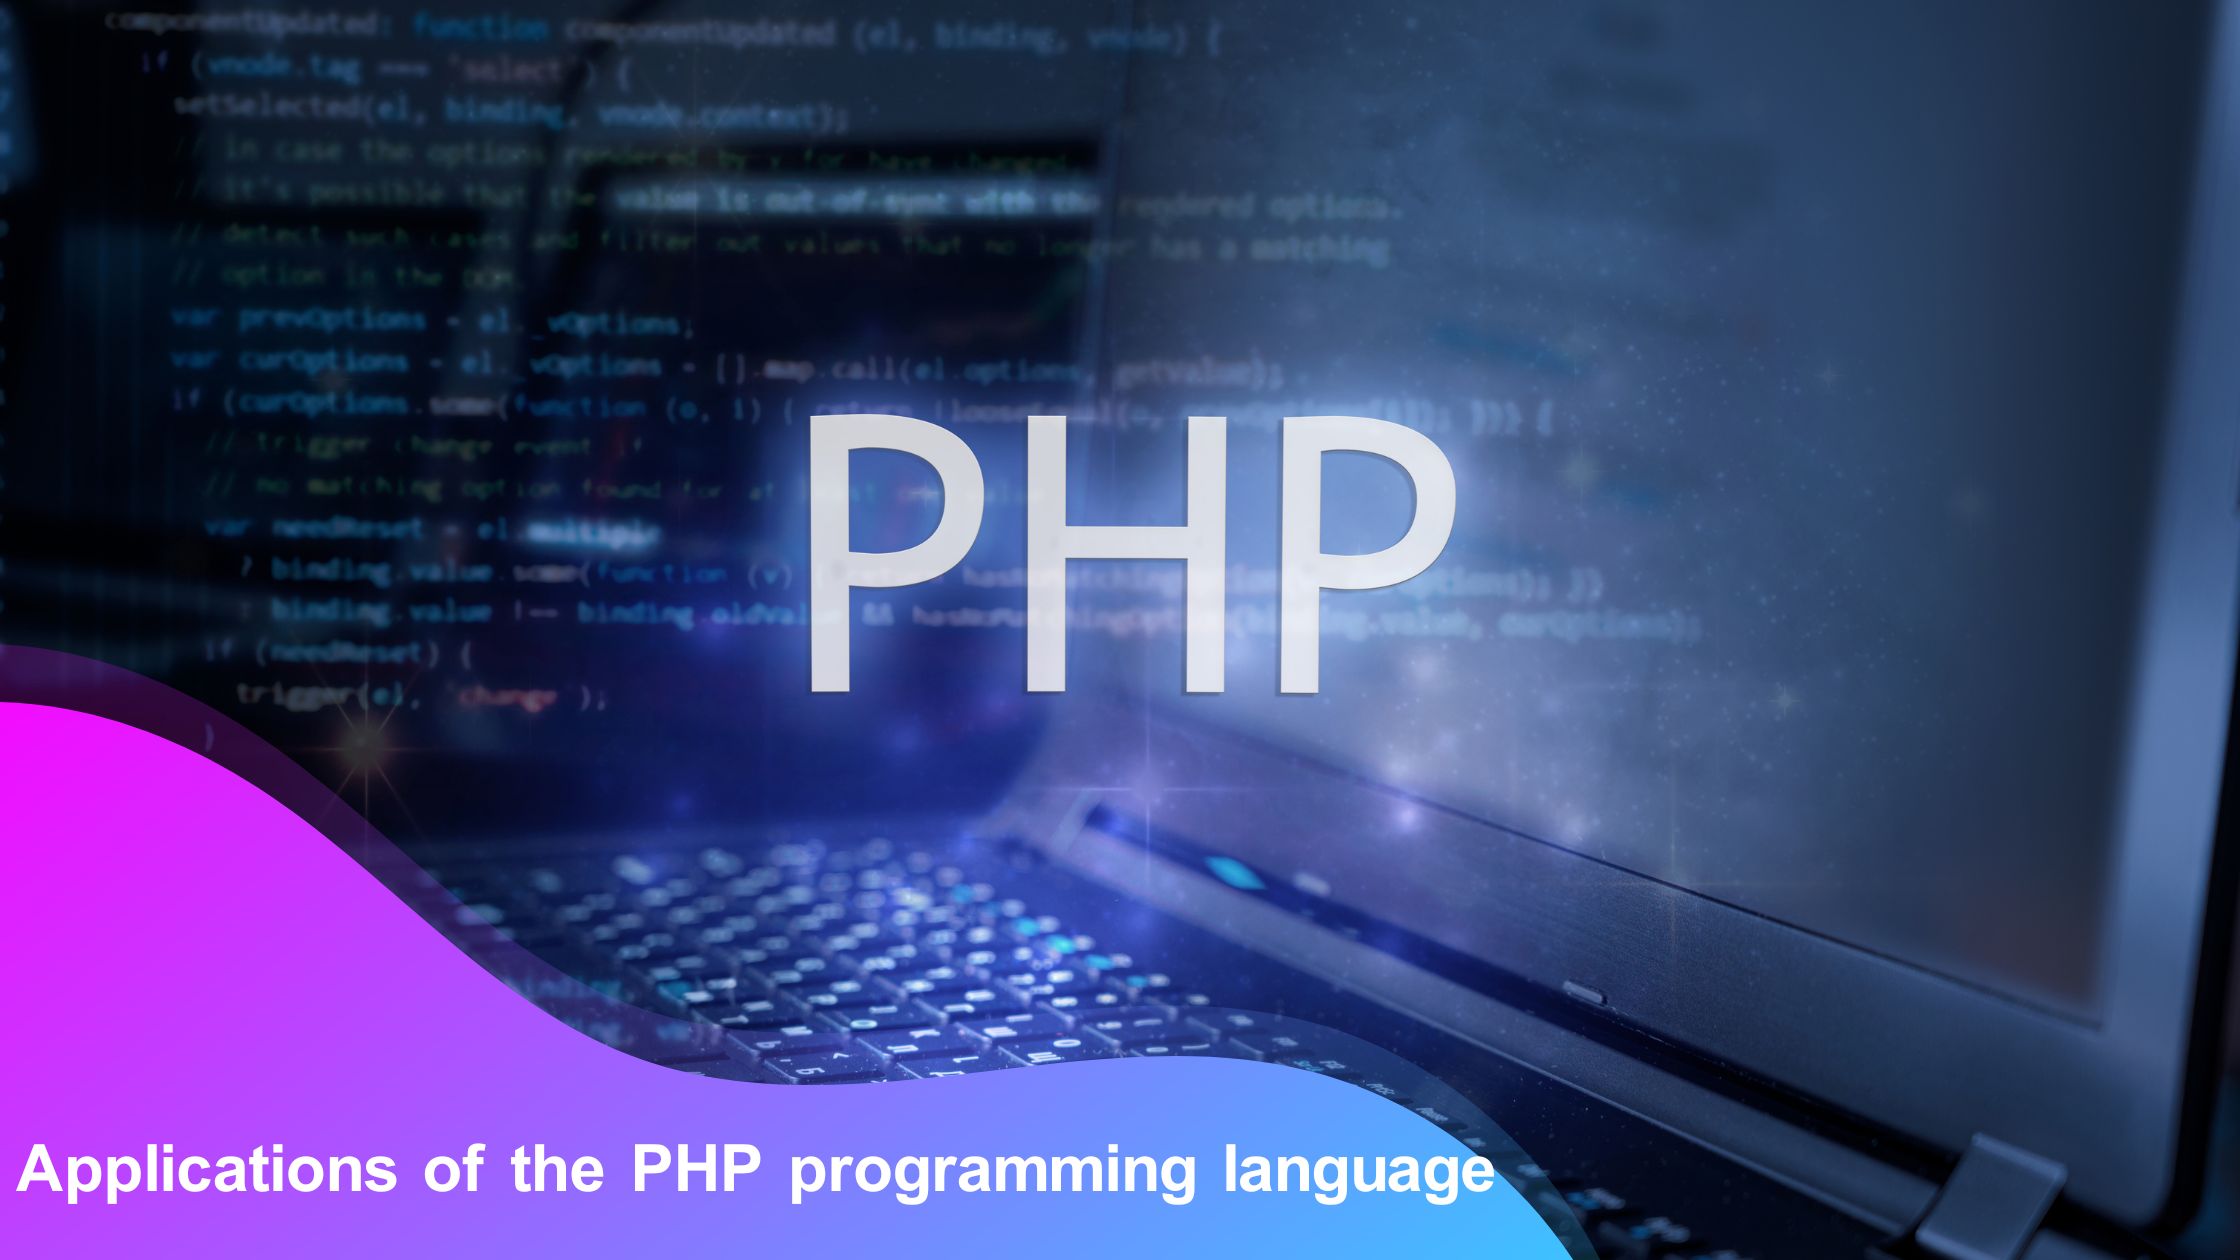 Applications of the PHP programming language